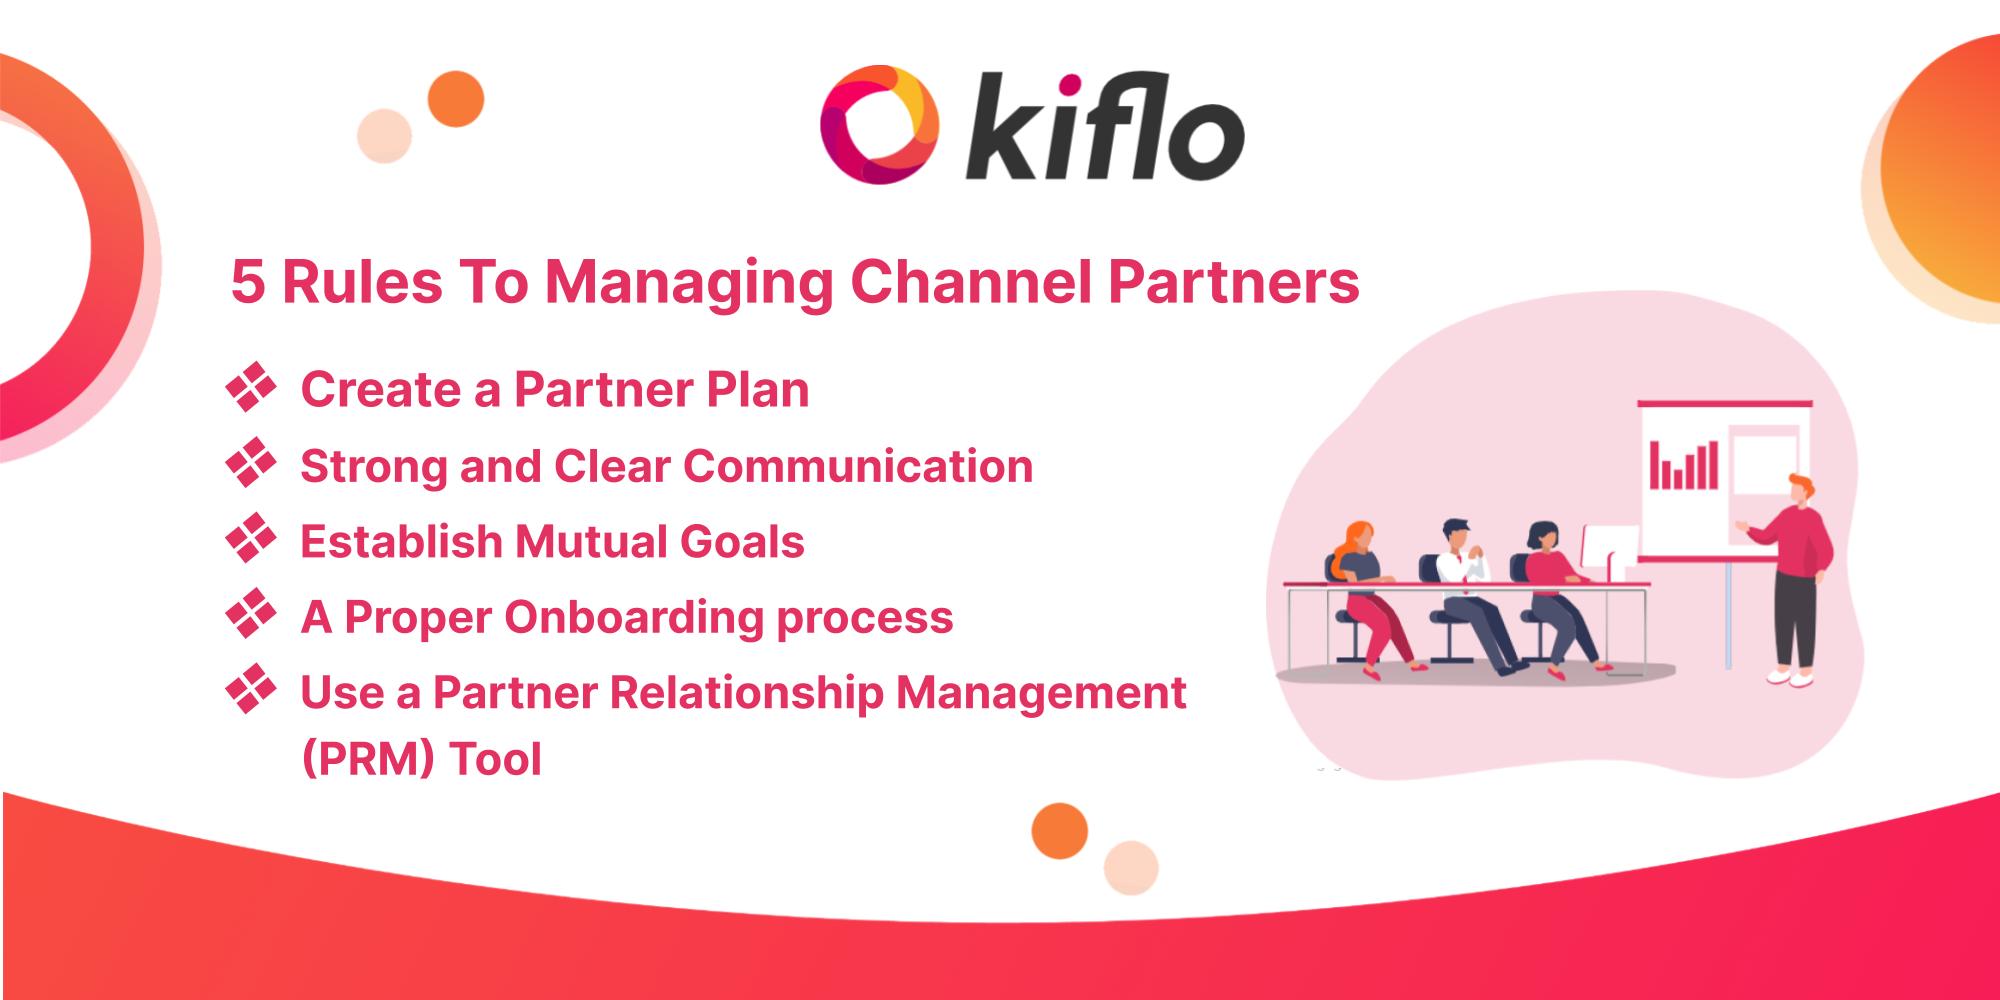 5 Rules To Managing Channel Partners